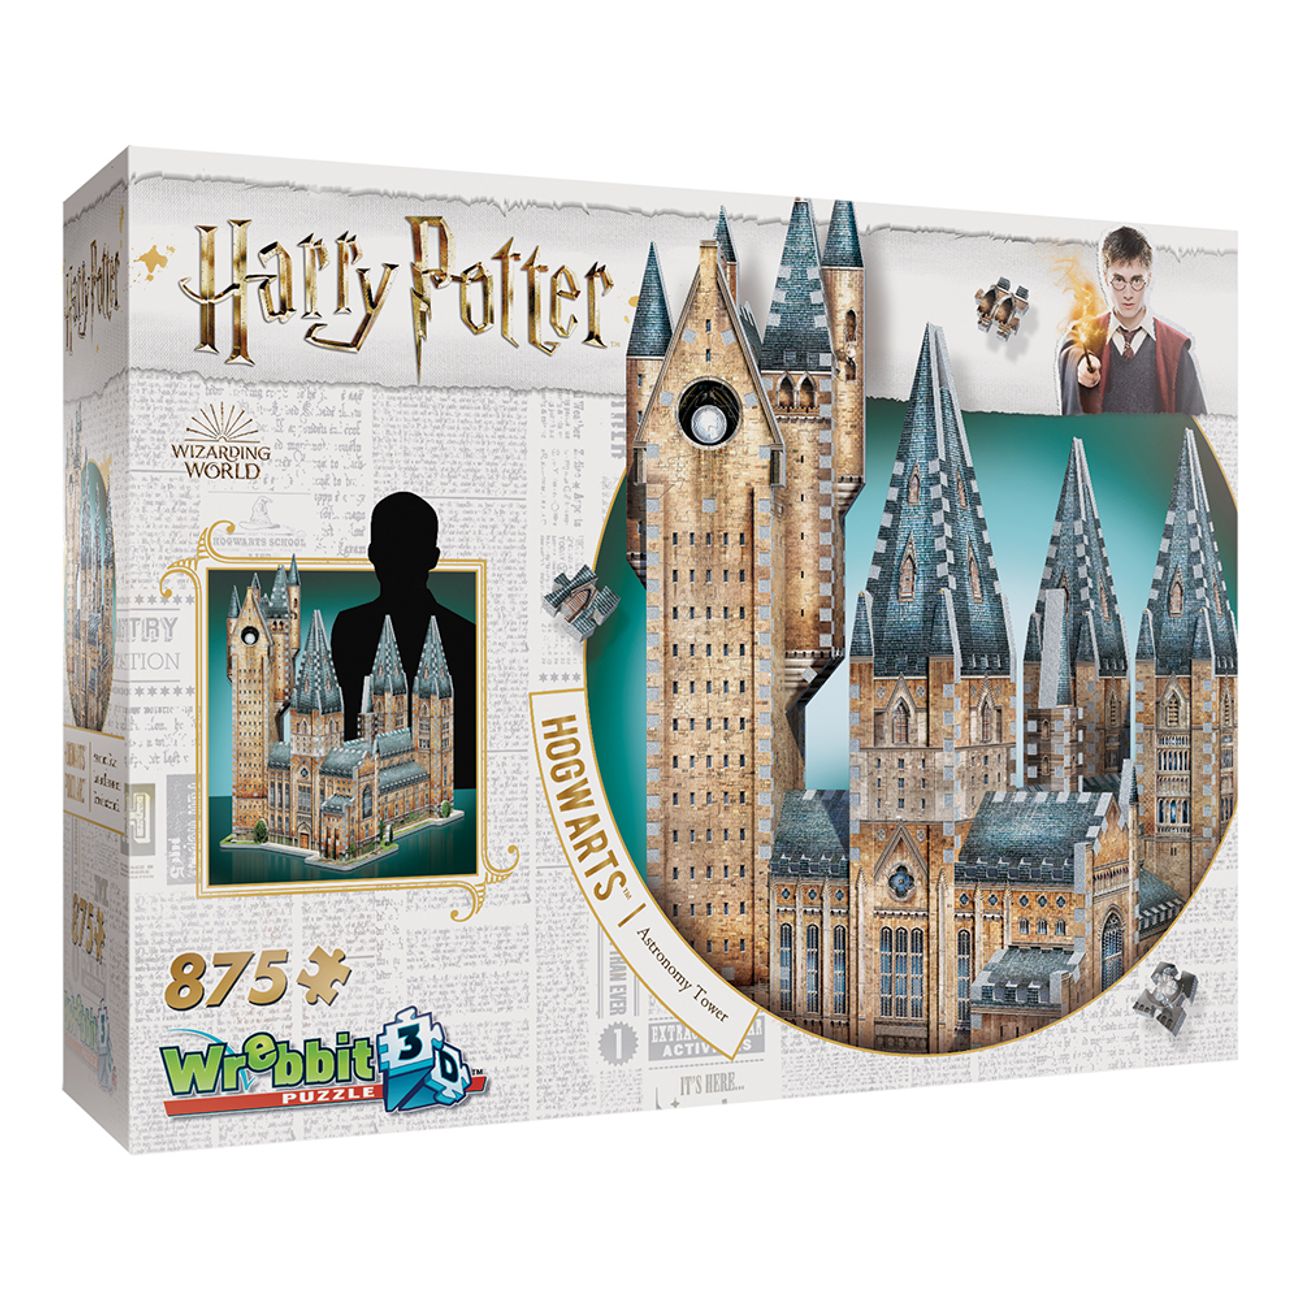 3d-pussel-harry-potter-hogwarts-astronomy-tower-1